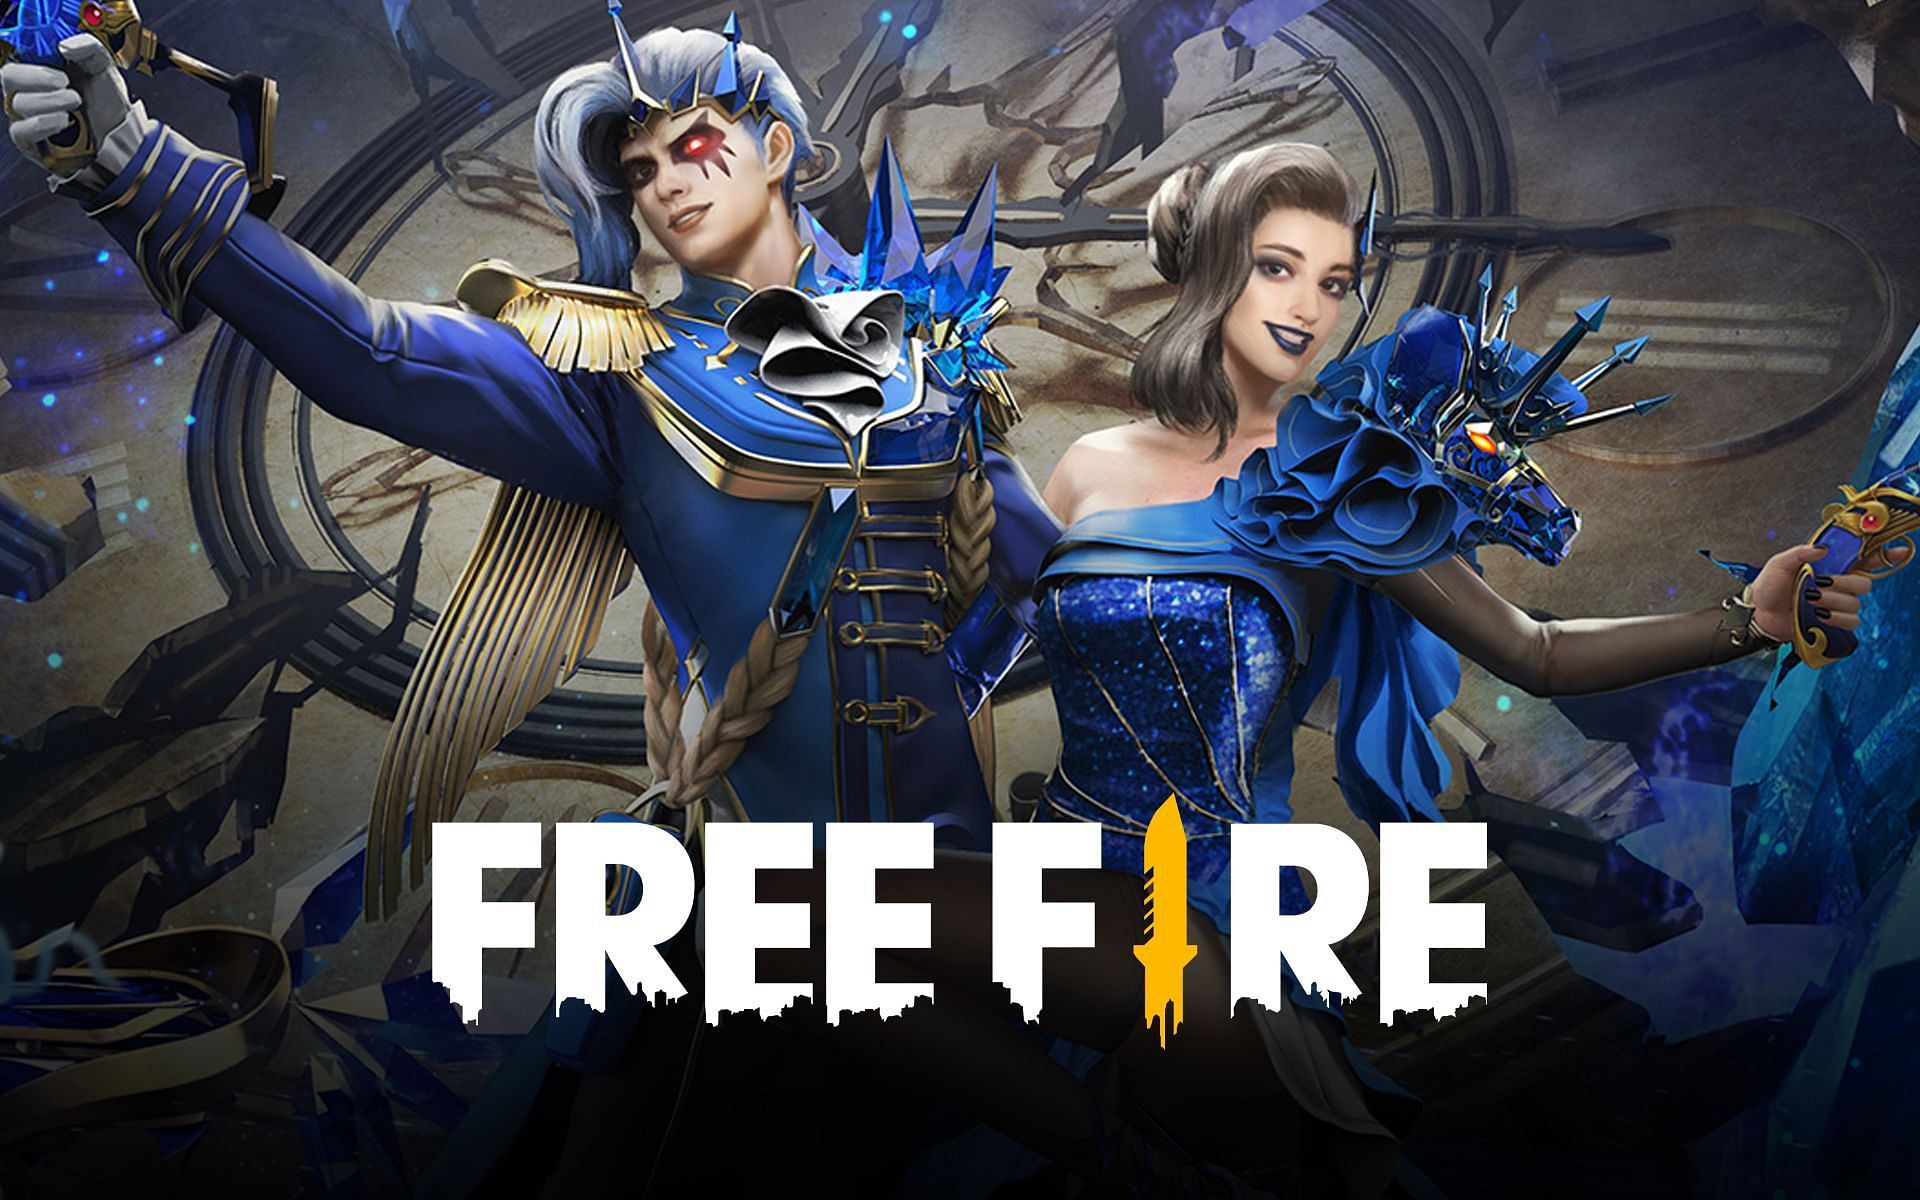 Free Fire online: How to play Free Fire game online without